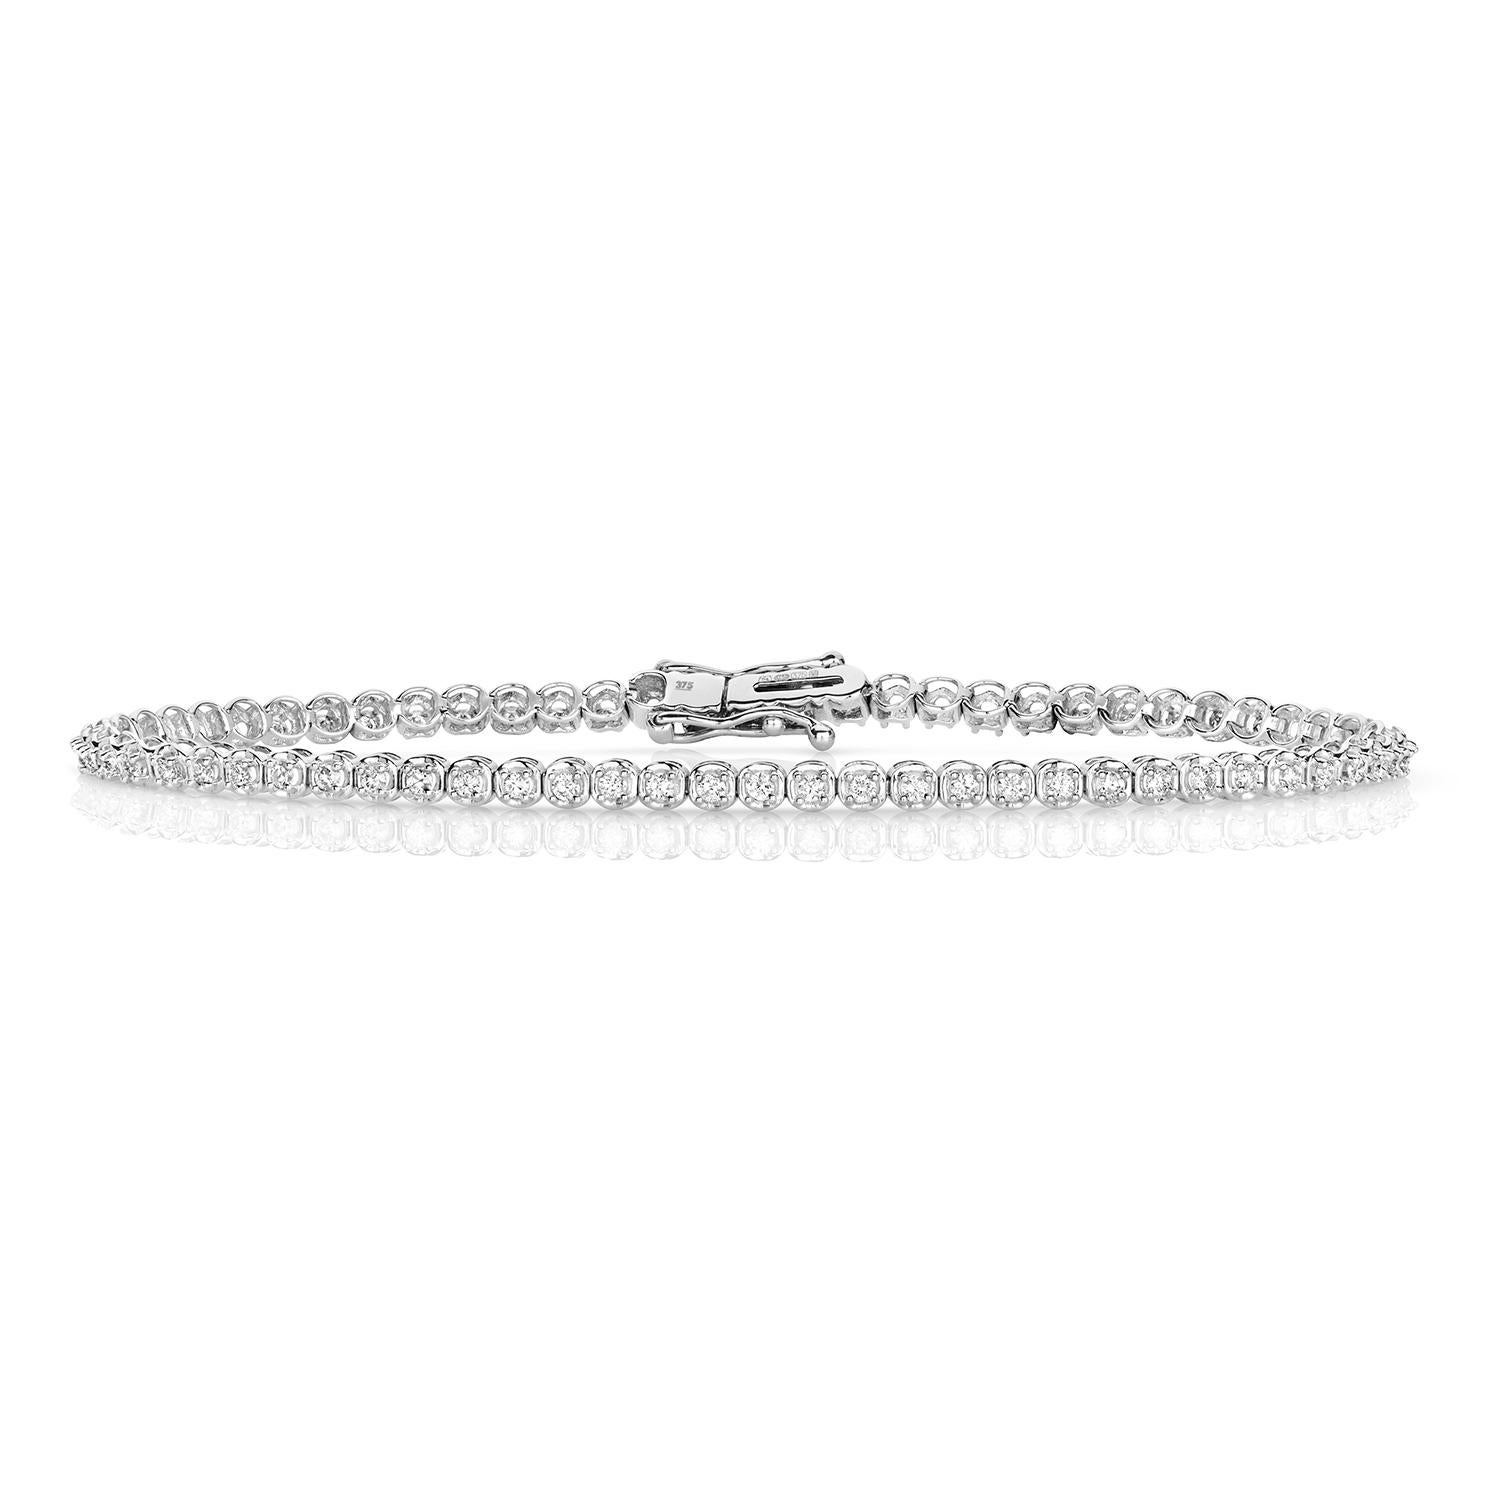 DIAMOND BRACELET

9CT W/G HI I1 1.00CT

Weight: 4.7g

Number Of Stones:66

Total Carates:1.000